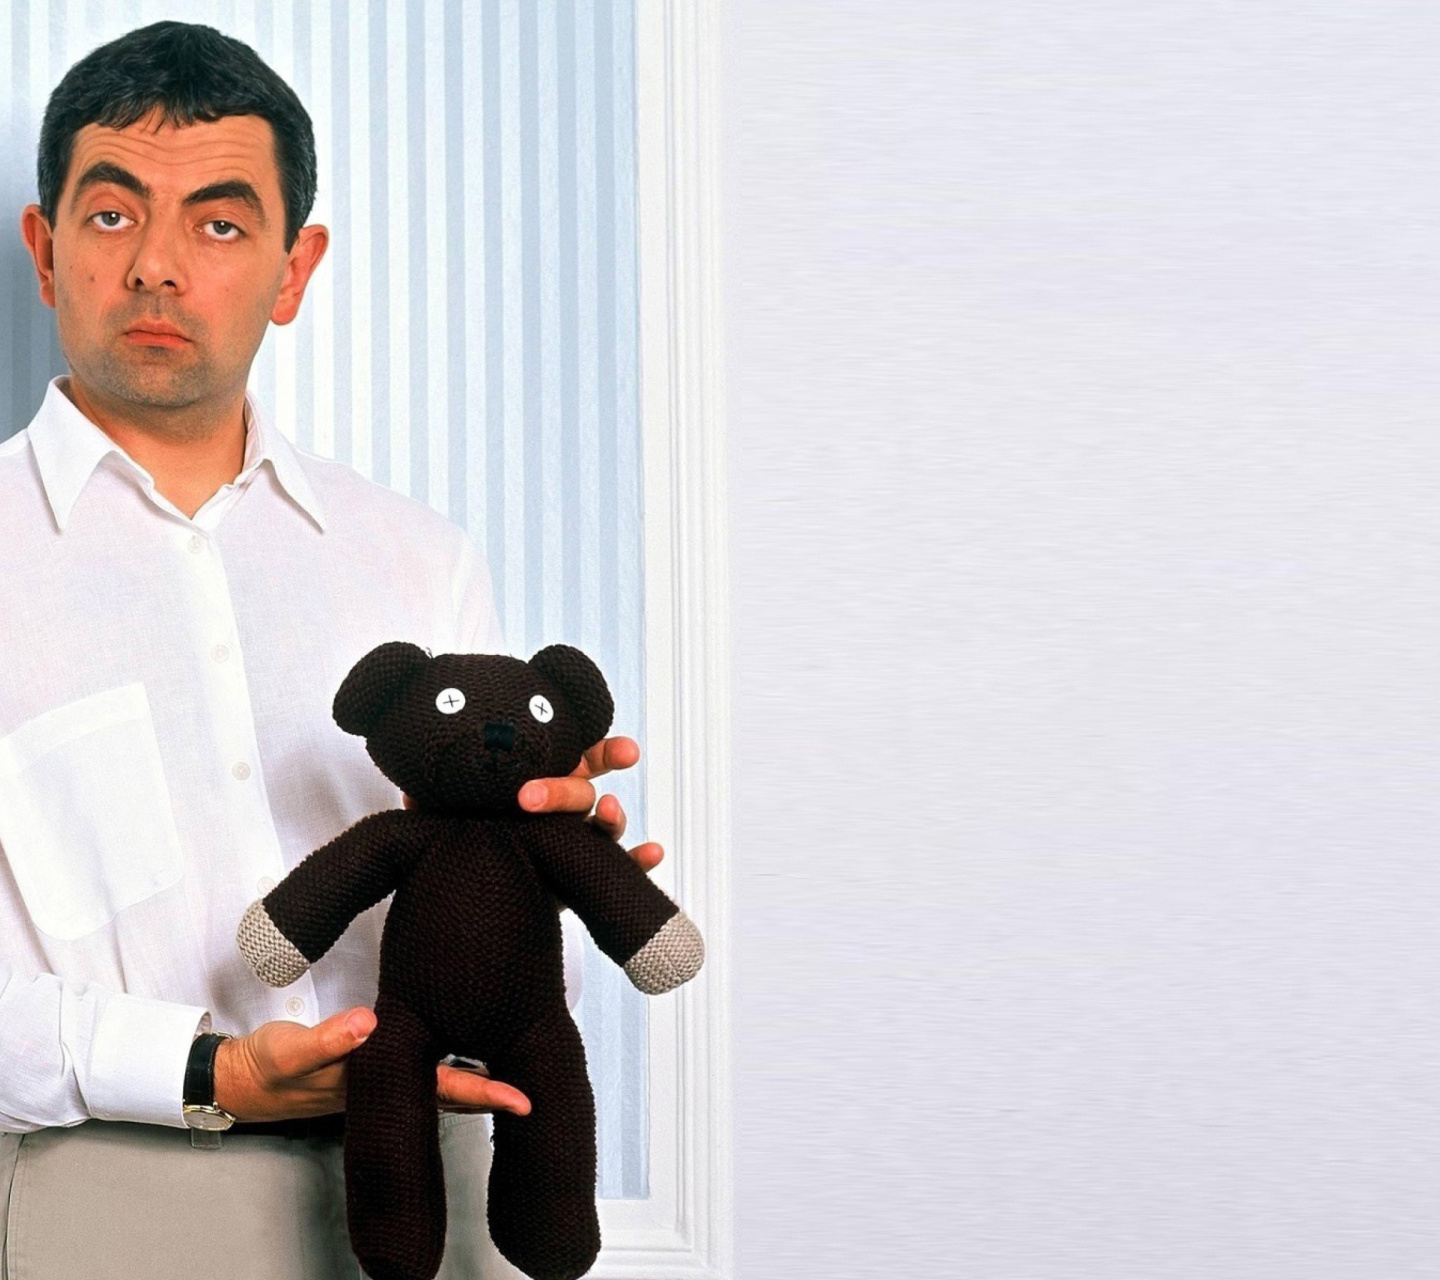 Mr Bean with Knitted Brown Teddy Bear wallpaper 1440x1280